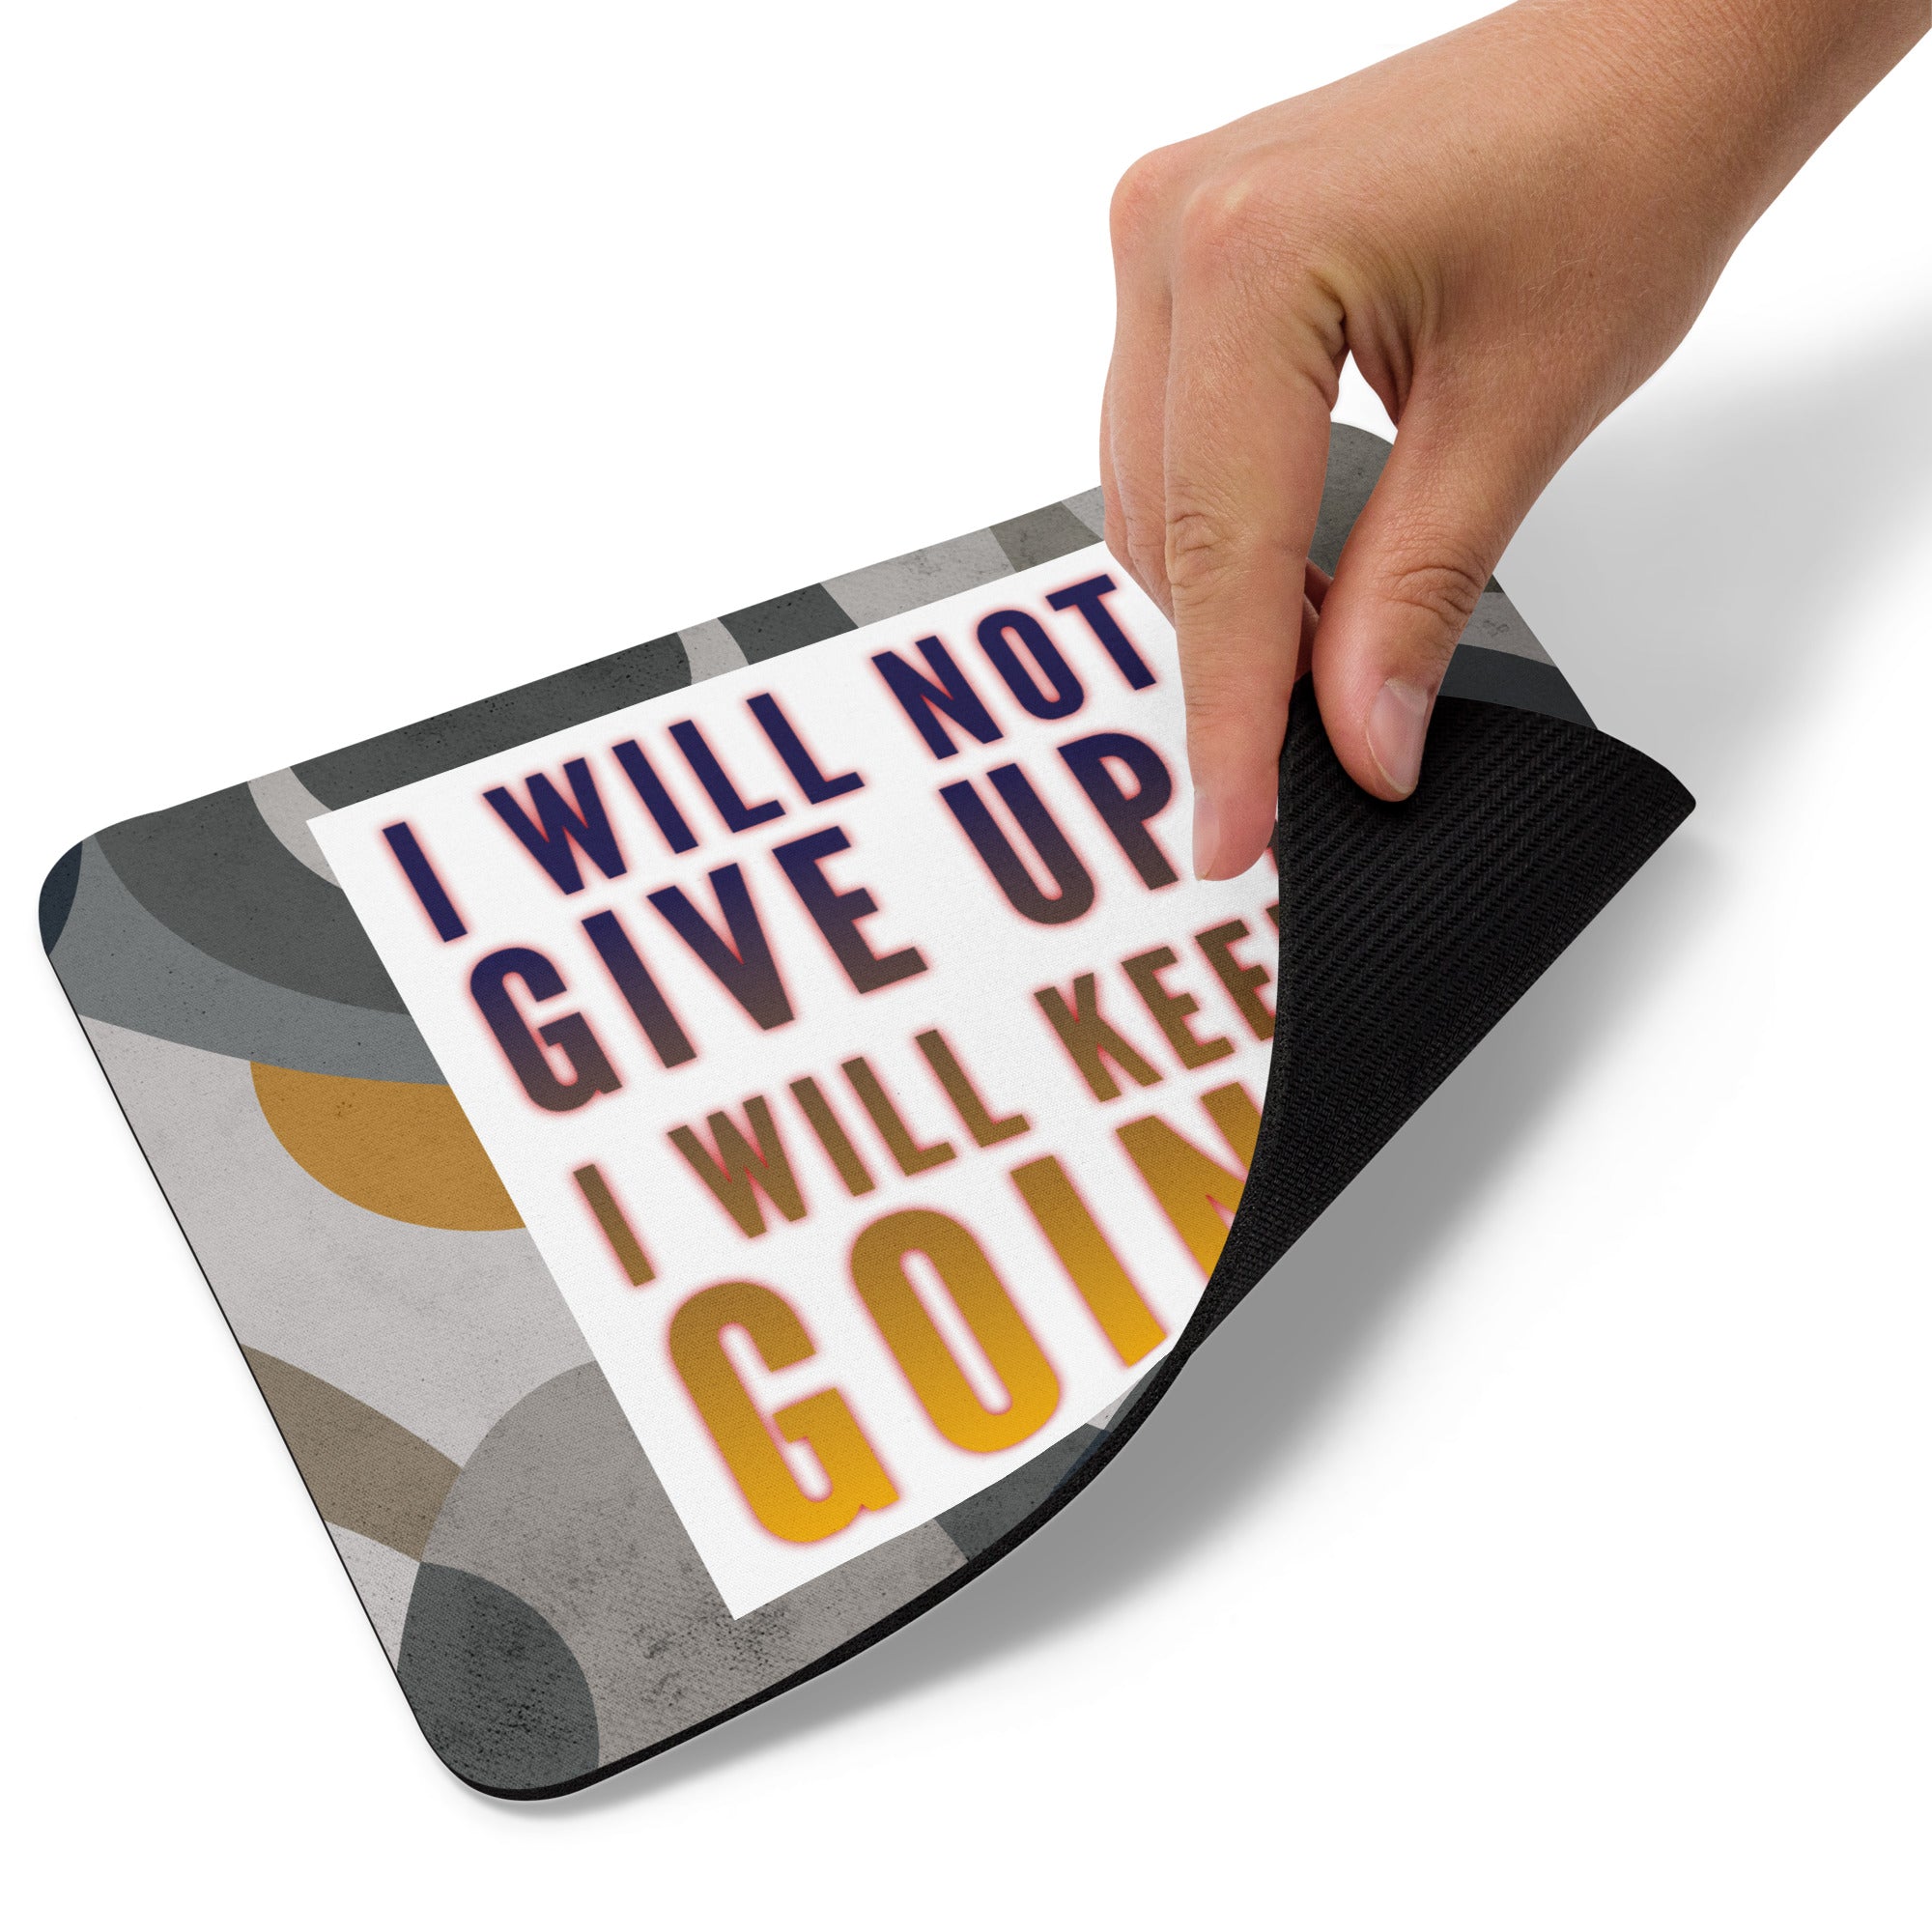 GloWell Designs - Mouse Pad - Affirmation Quote - I Will Not Give Up - GloWell Designs